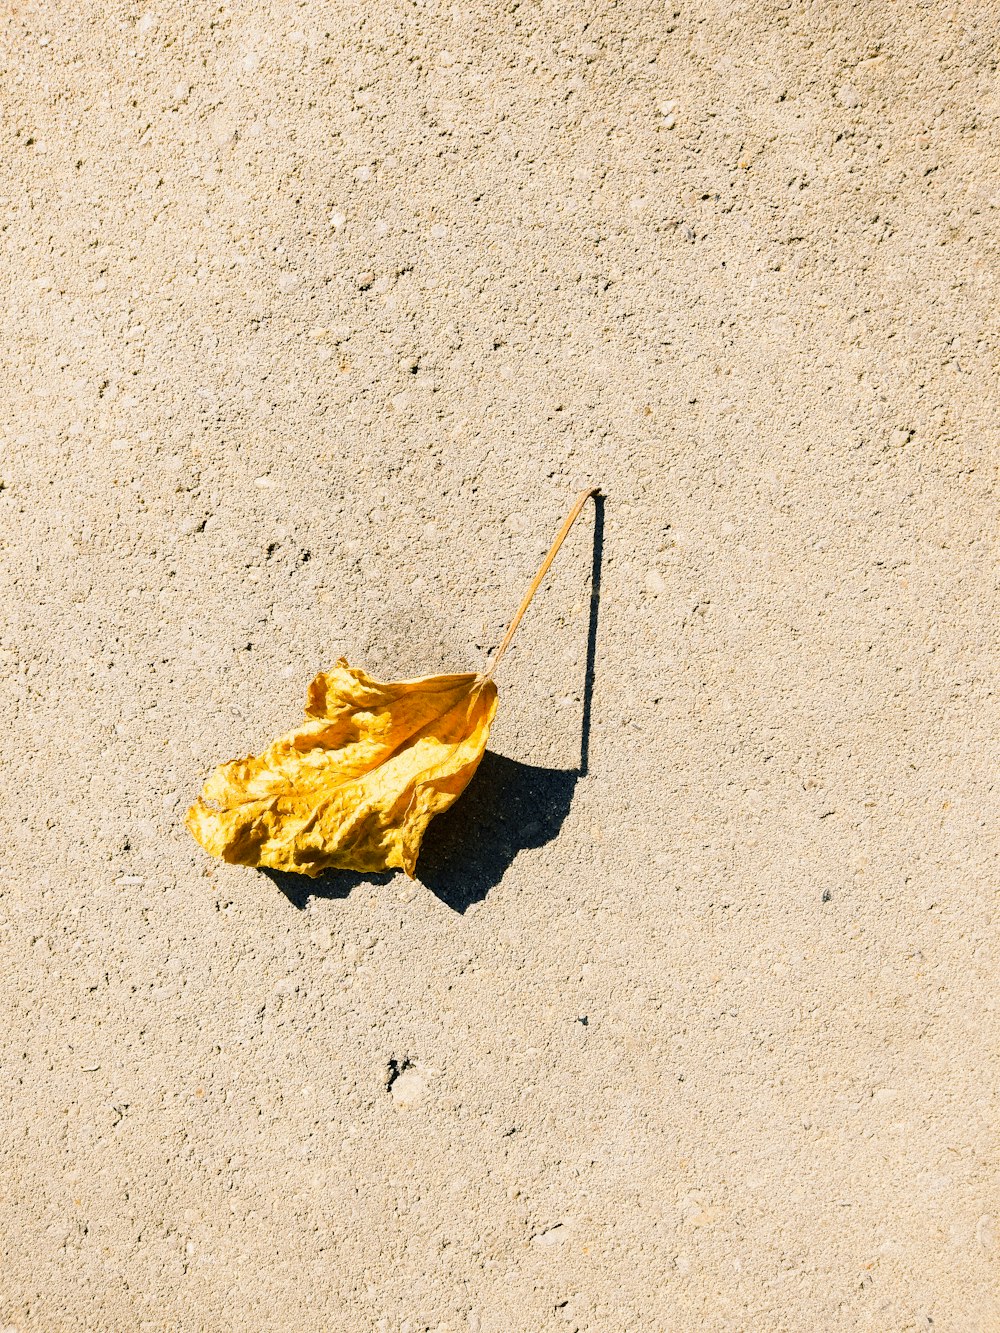 a single yellow leaf on the ground